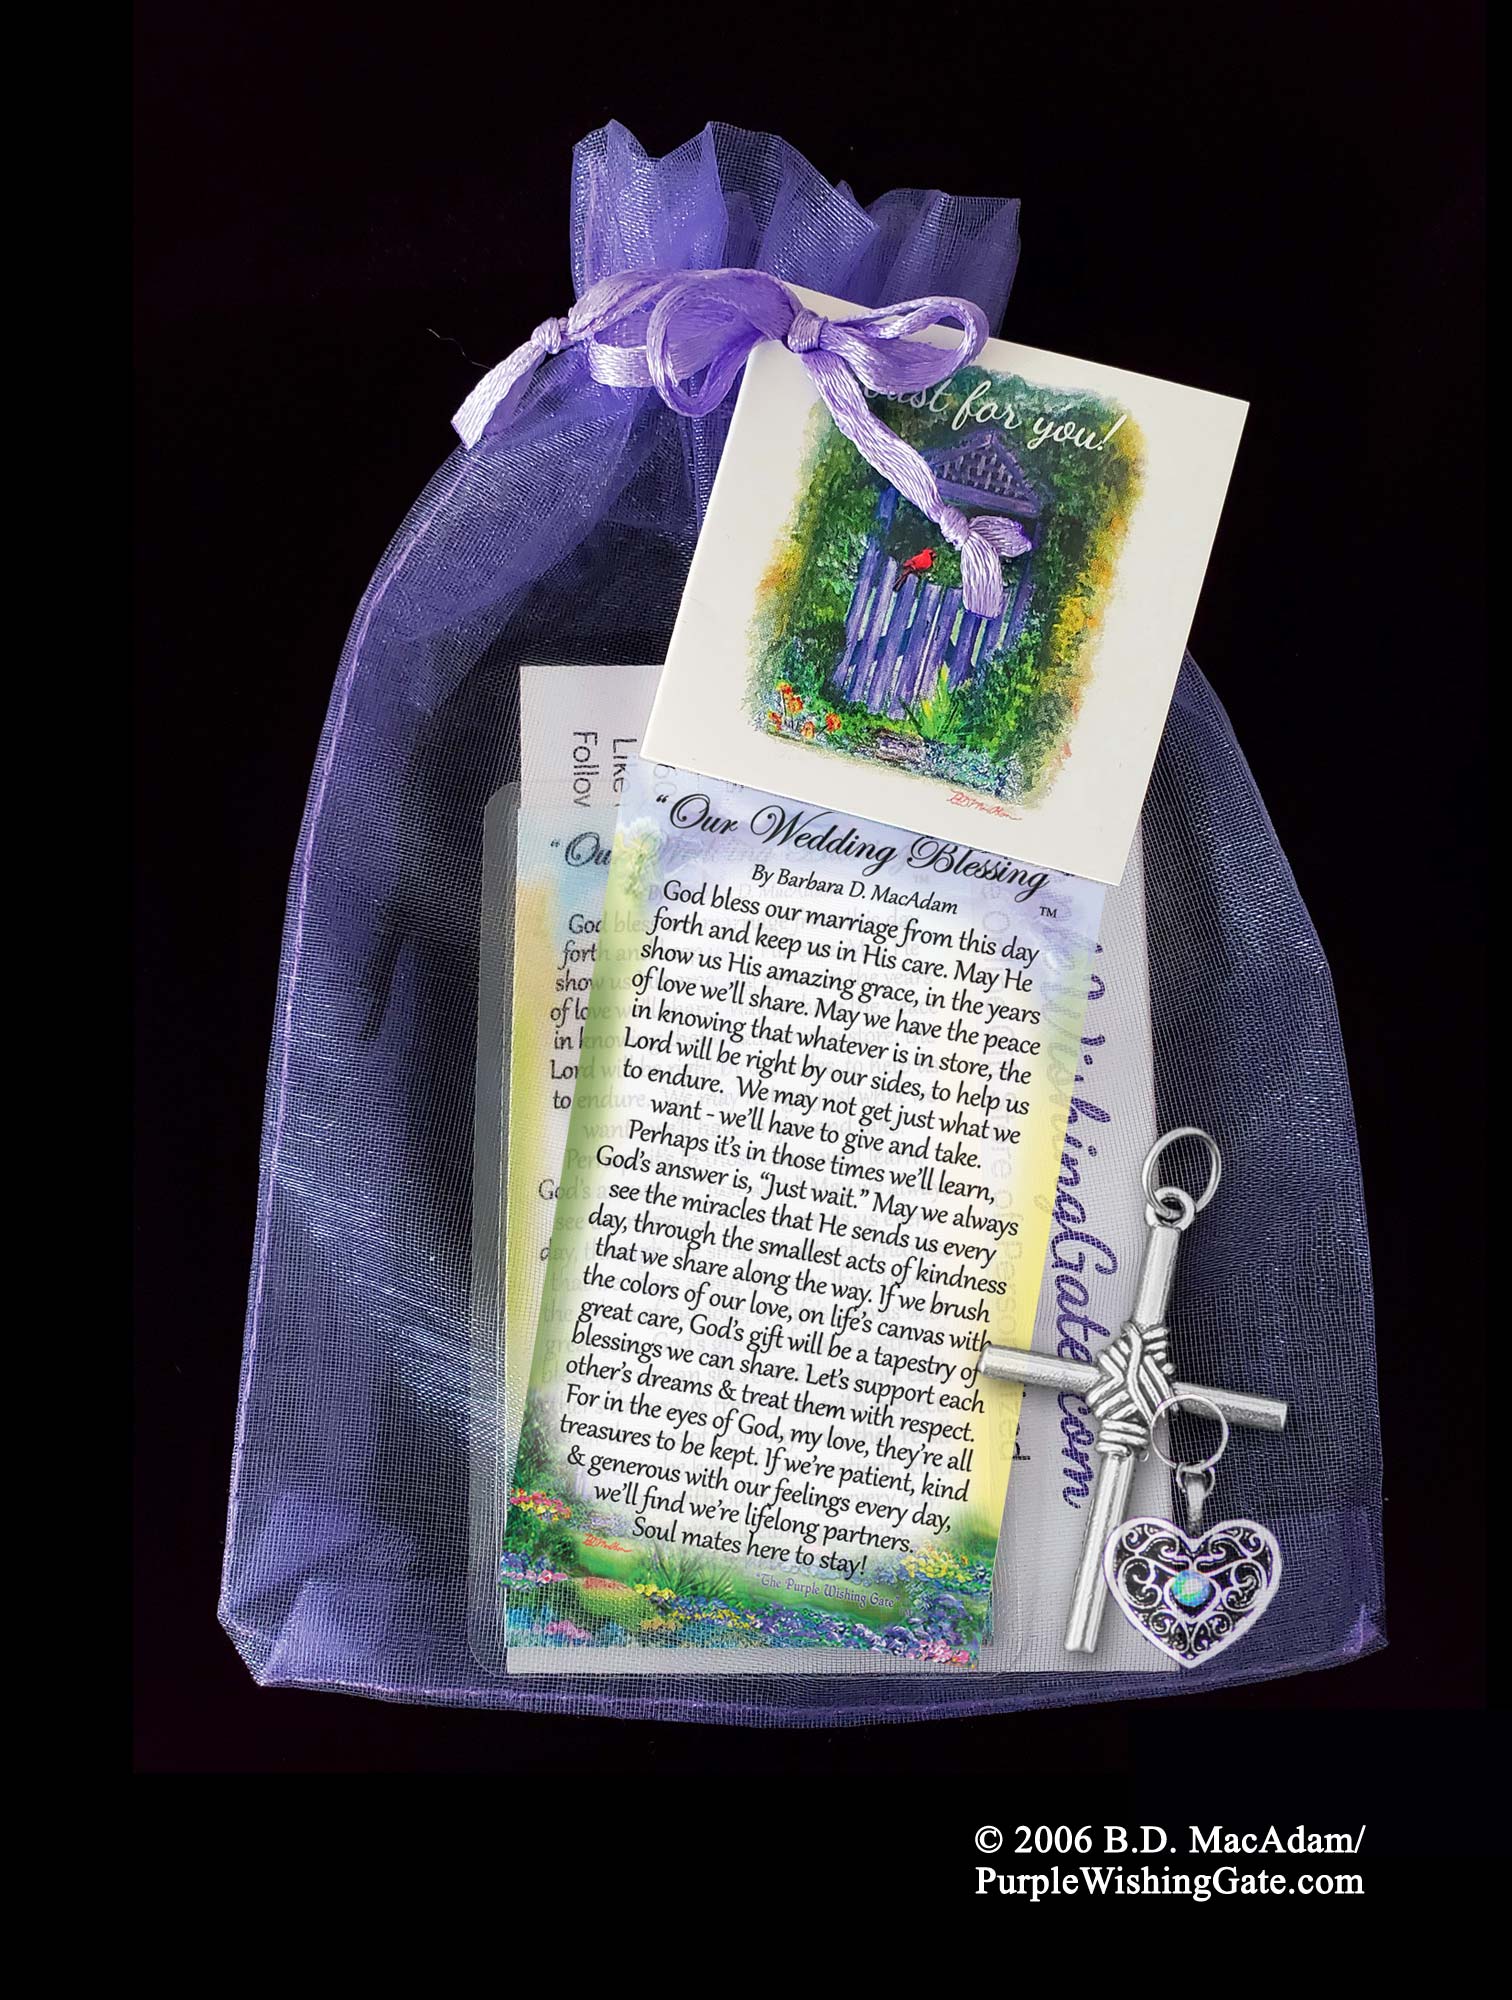 Our Wedding Blessing - Pocket Blessing | PurpleWishingGate.com